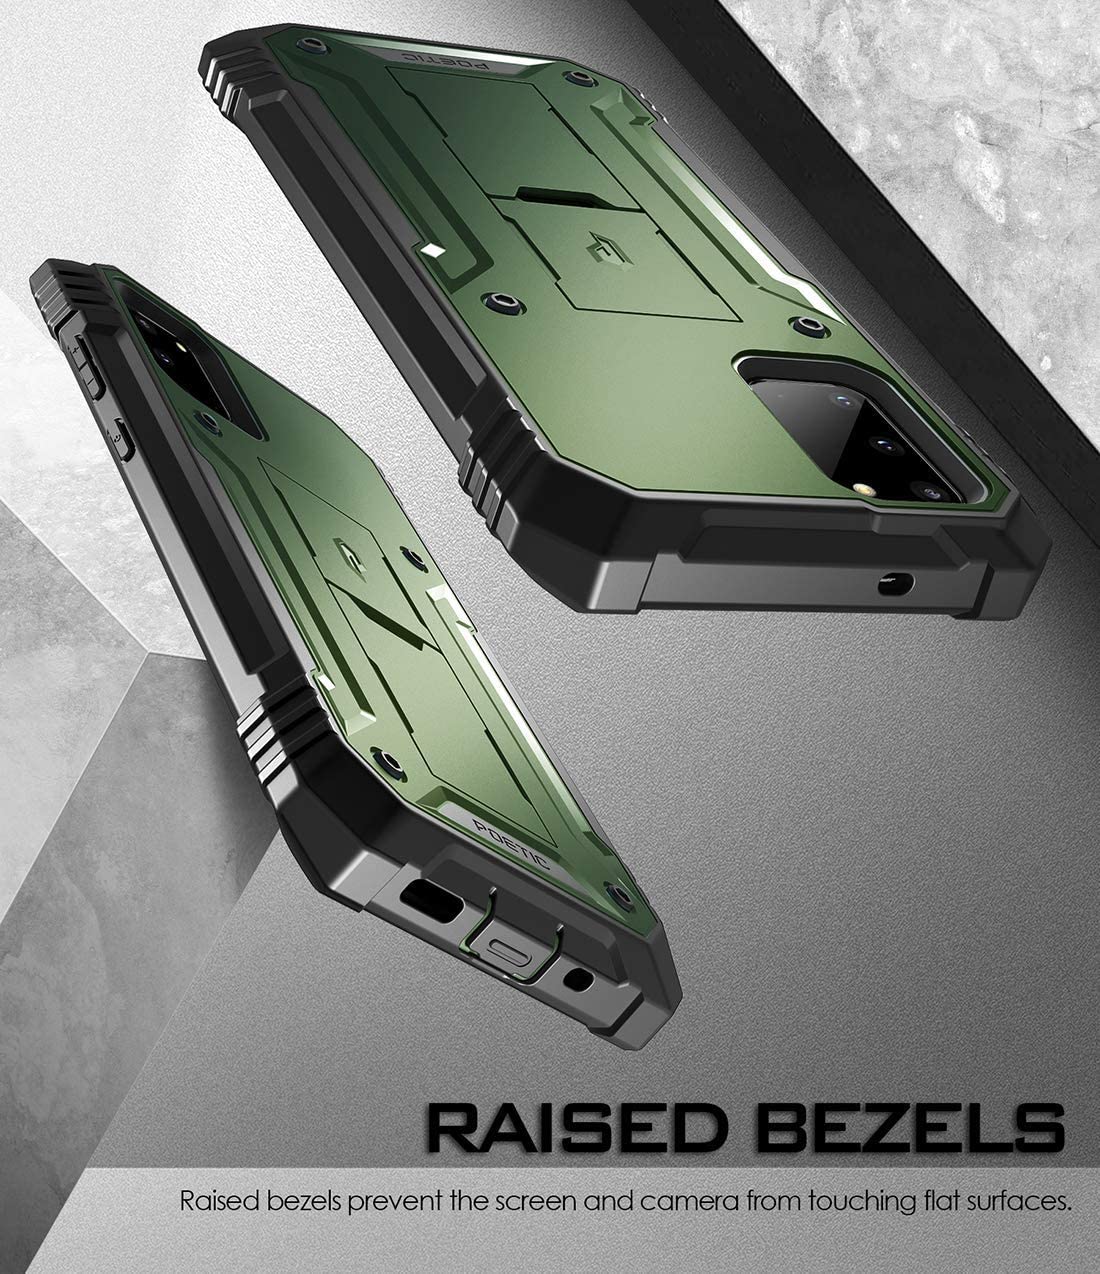 Poetic Revolution Series Designed for Samsung Galaxy S20 Case, Full-Body Rugged Dual-Layer Shockproof Protective Cover - Metallic Green. - e4cents